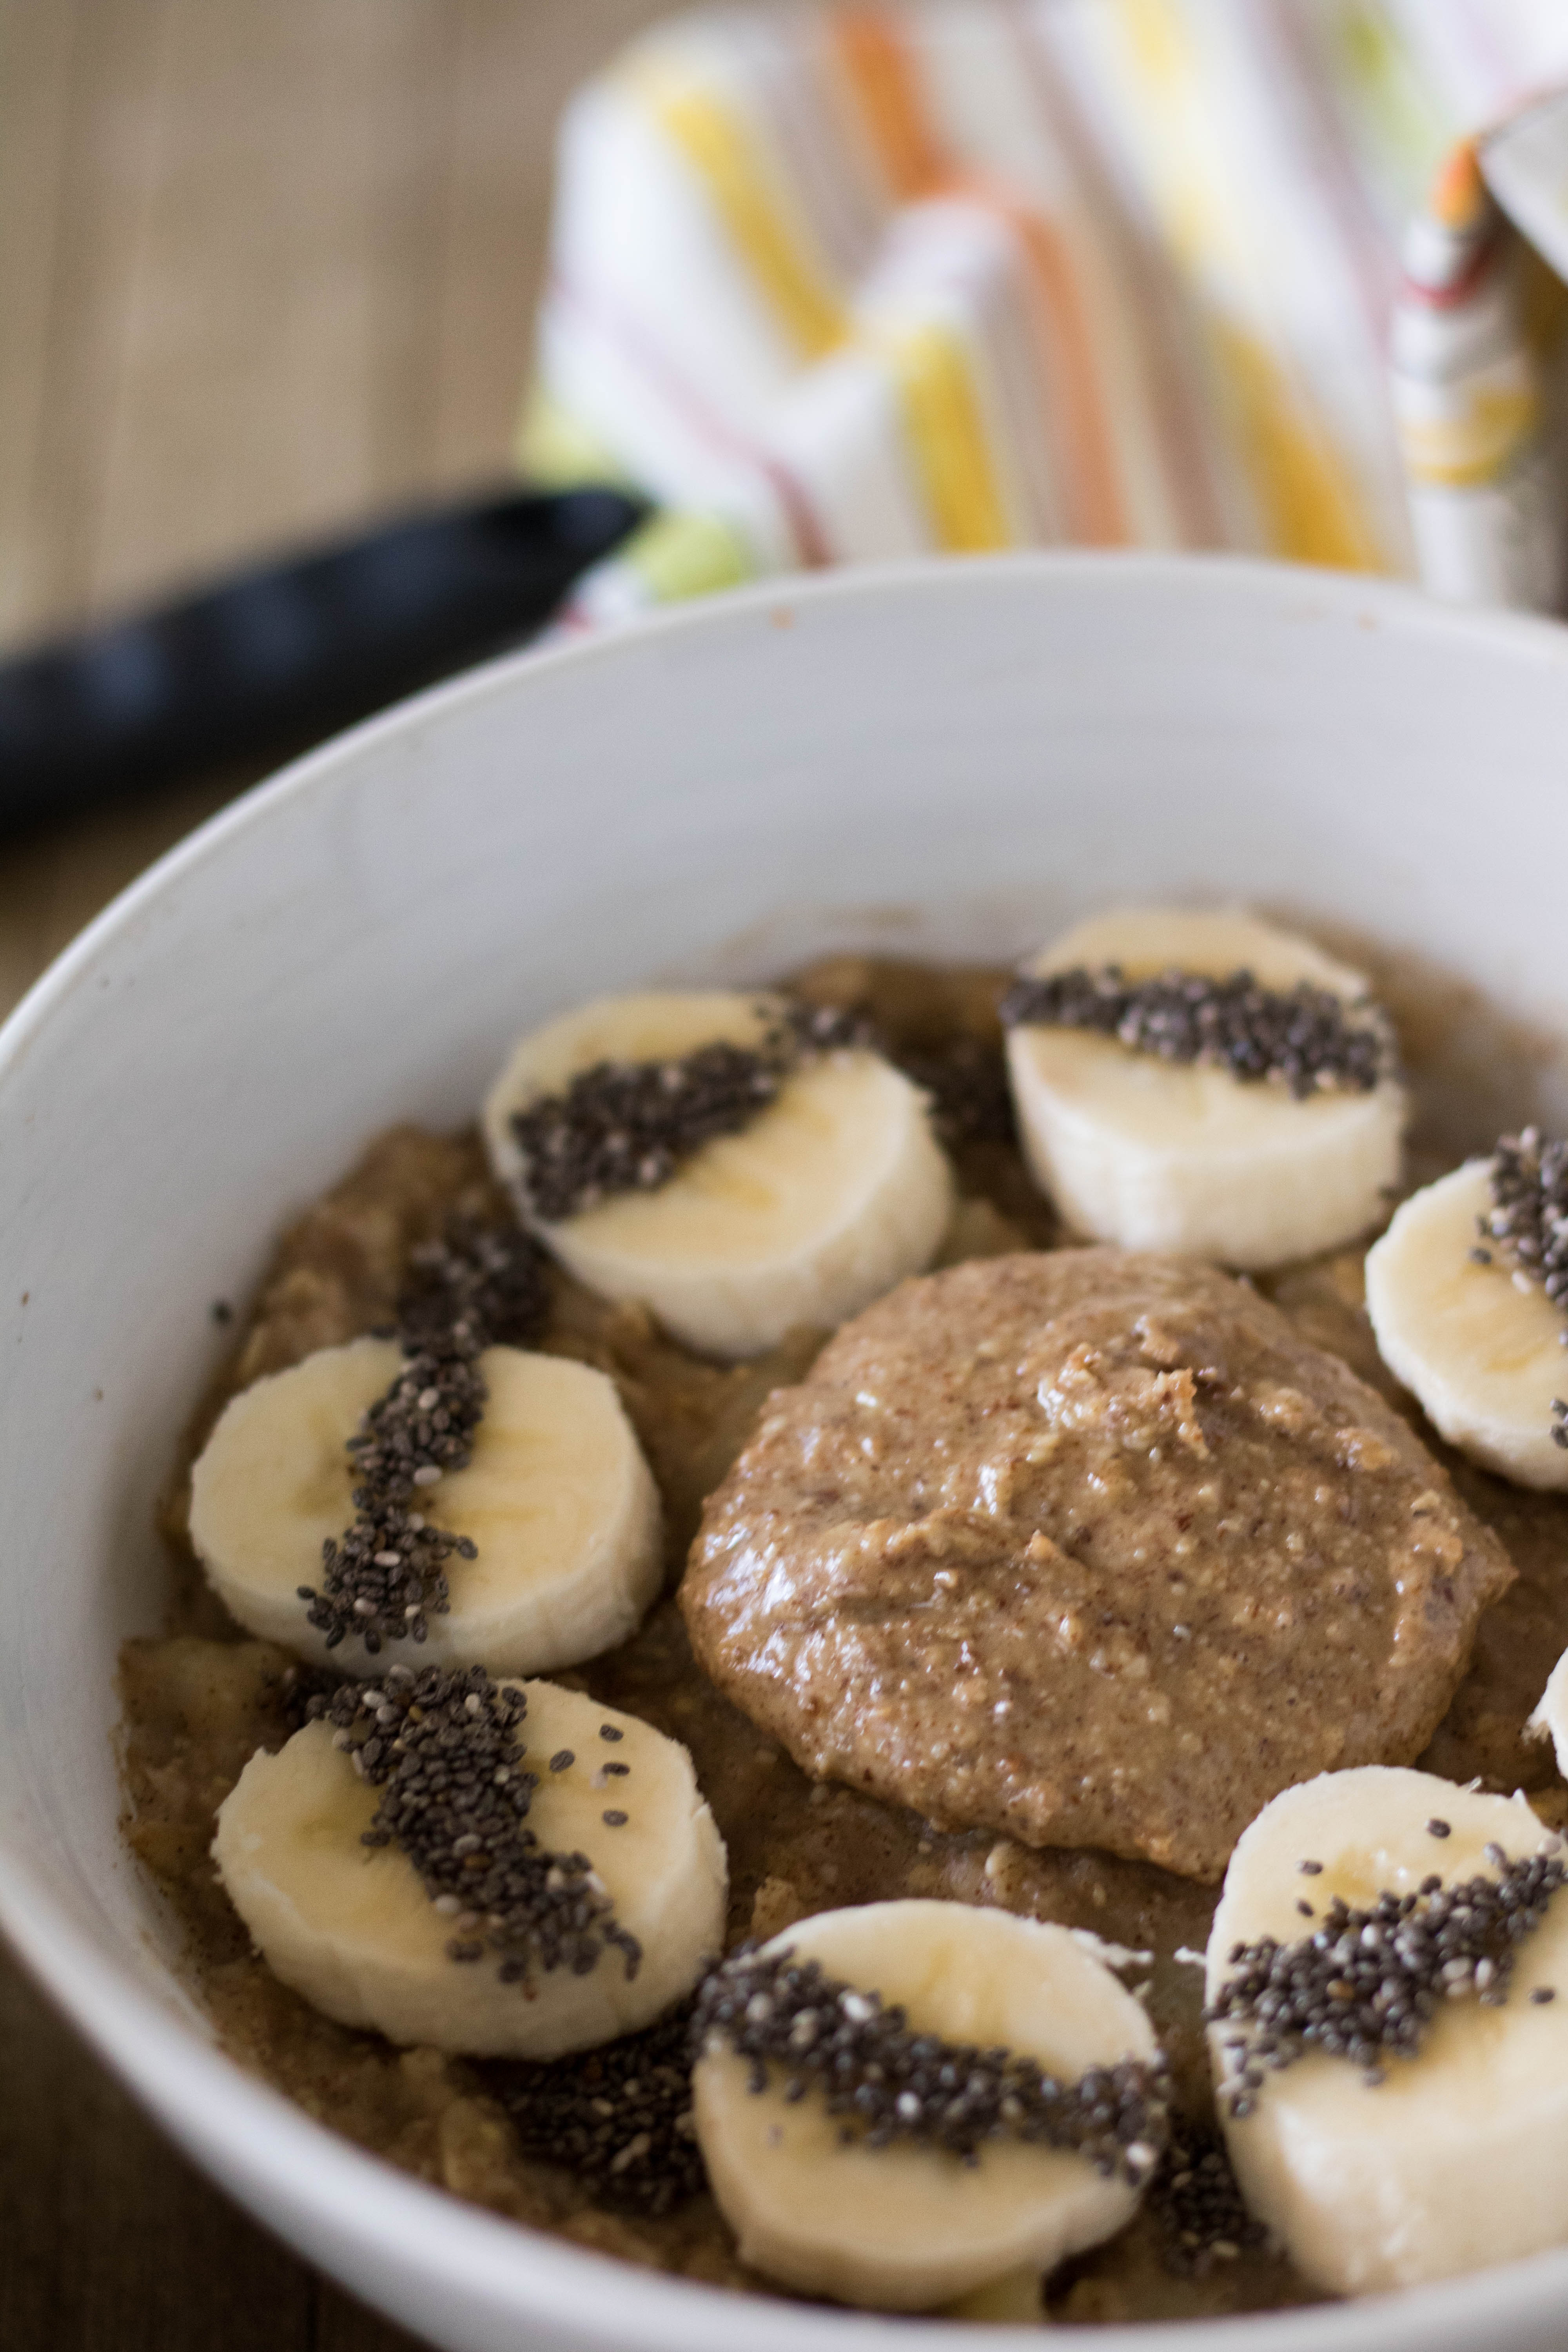 no sugar added banana oatmeal with nut butter and chia seeds